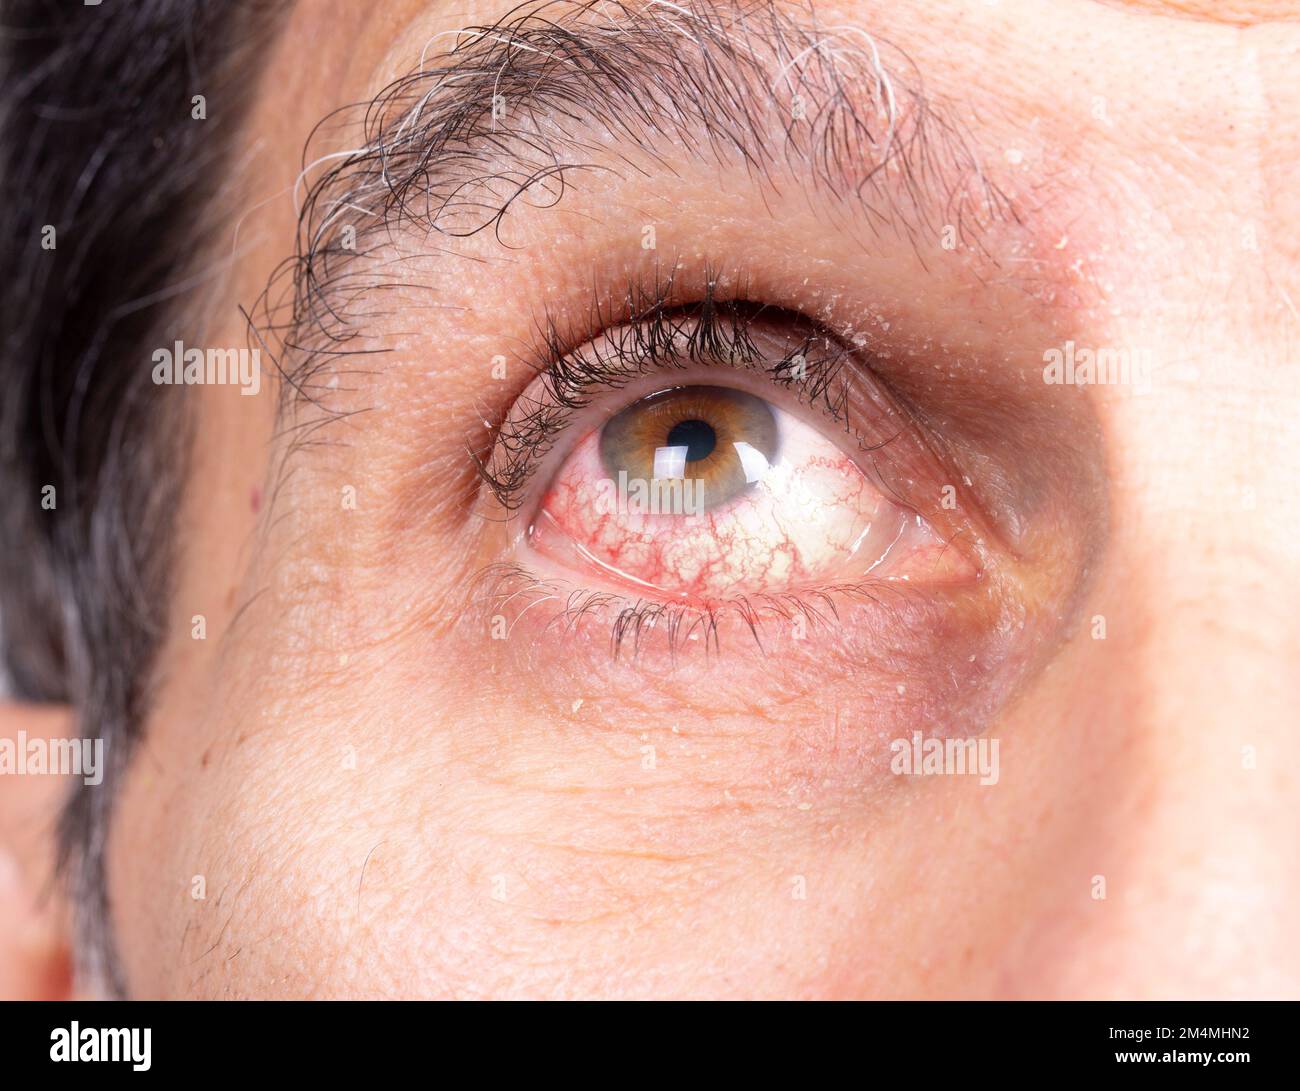 Macro of the eye of a caucasian man suffering from uveitis. Eye with redness due to red capillaries. Uveitis causes irritation and tearing of the eyes Stock Photo